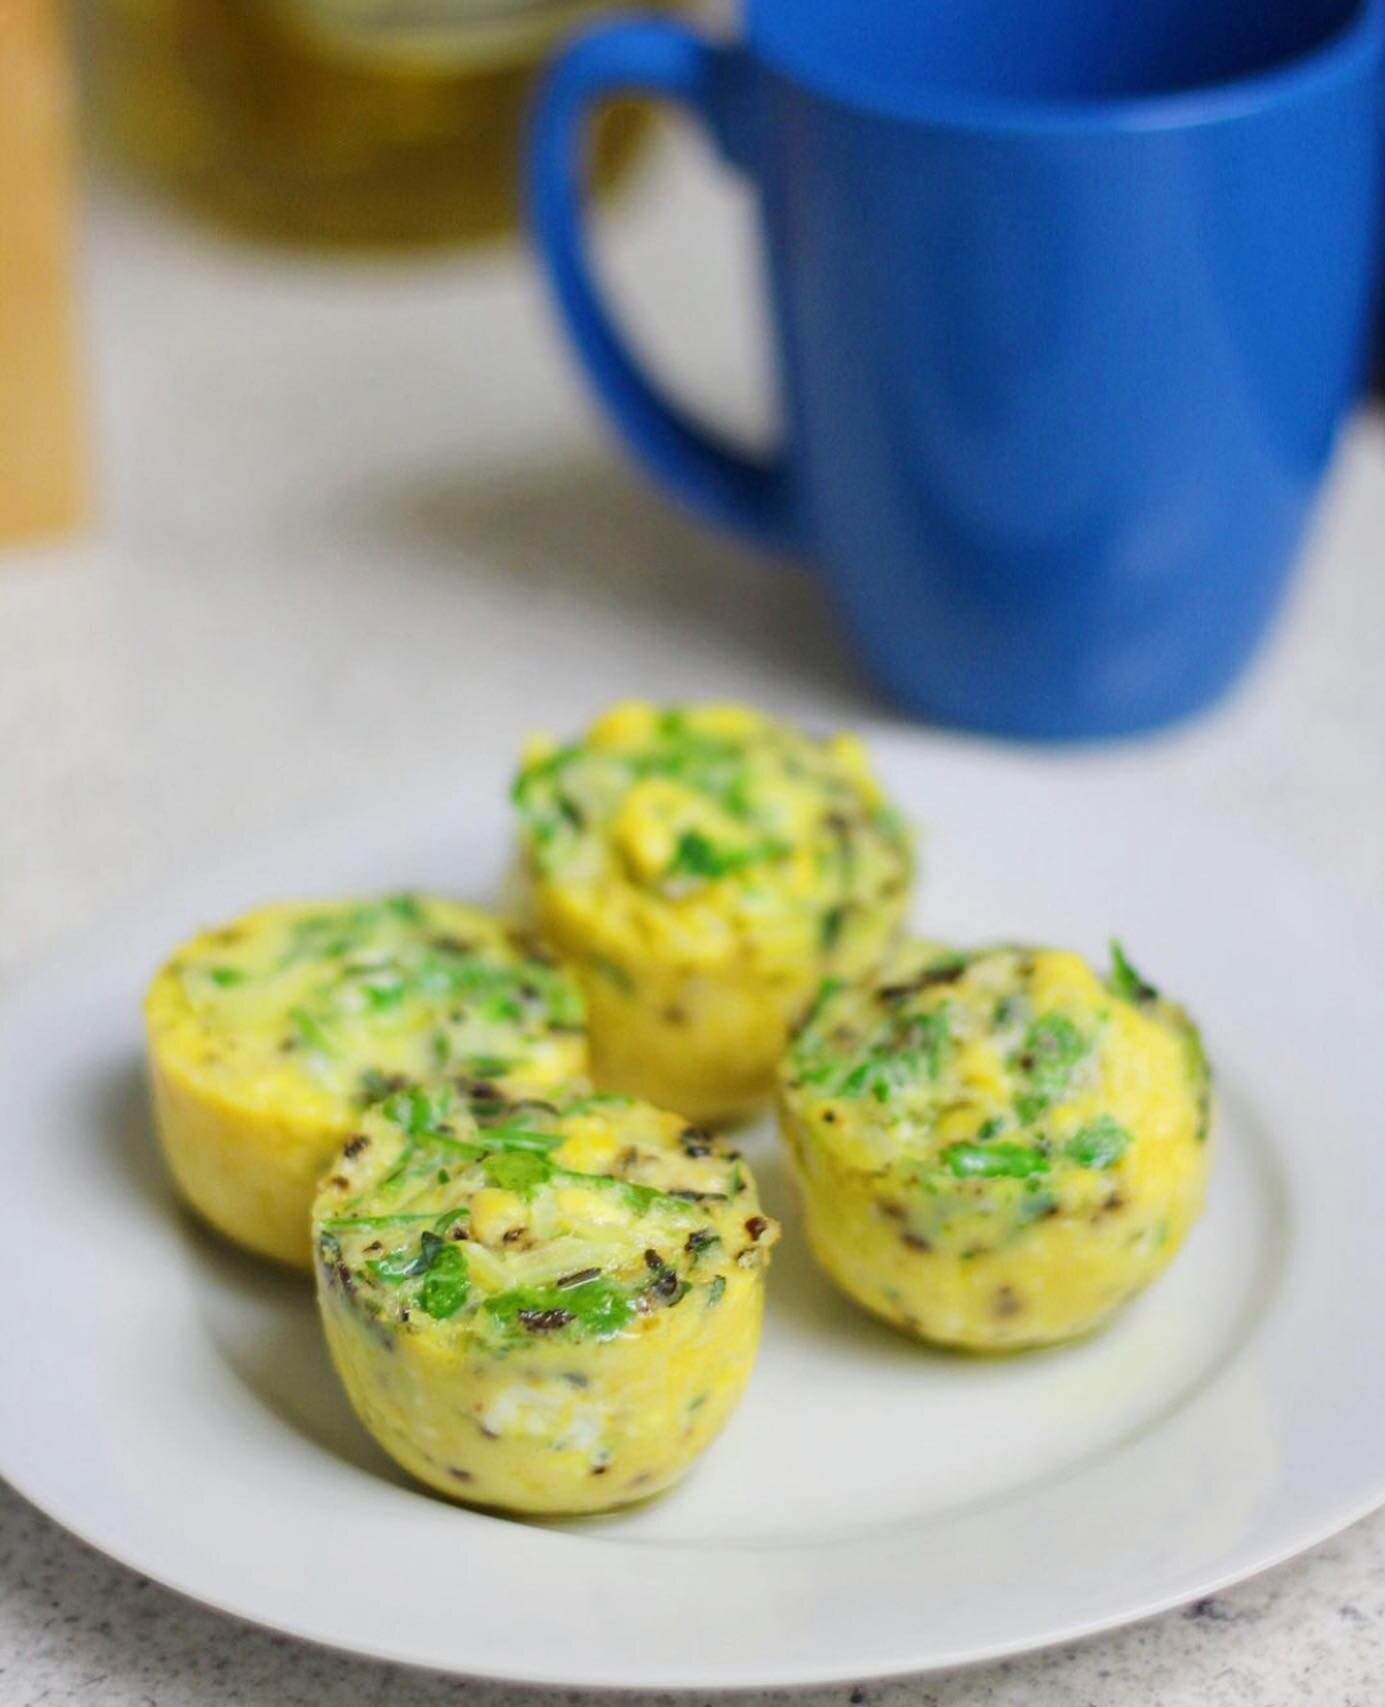 On the menu this week...Paleo copycat Starbucks egg bites! I made these in the instant pot and they might be the easiest meal prep I&rsquo;ve ever done 💁&zwj;♀️ I ended up using whatever leftovers I had in the fridge which is another thing that&rsqu